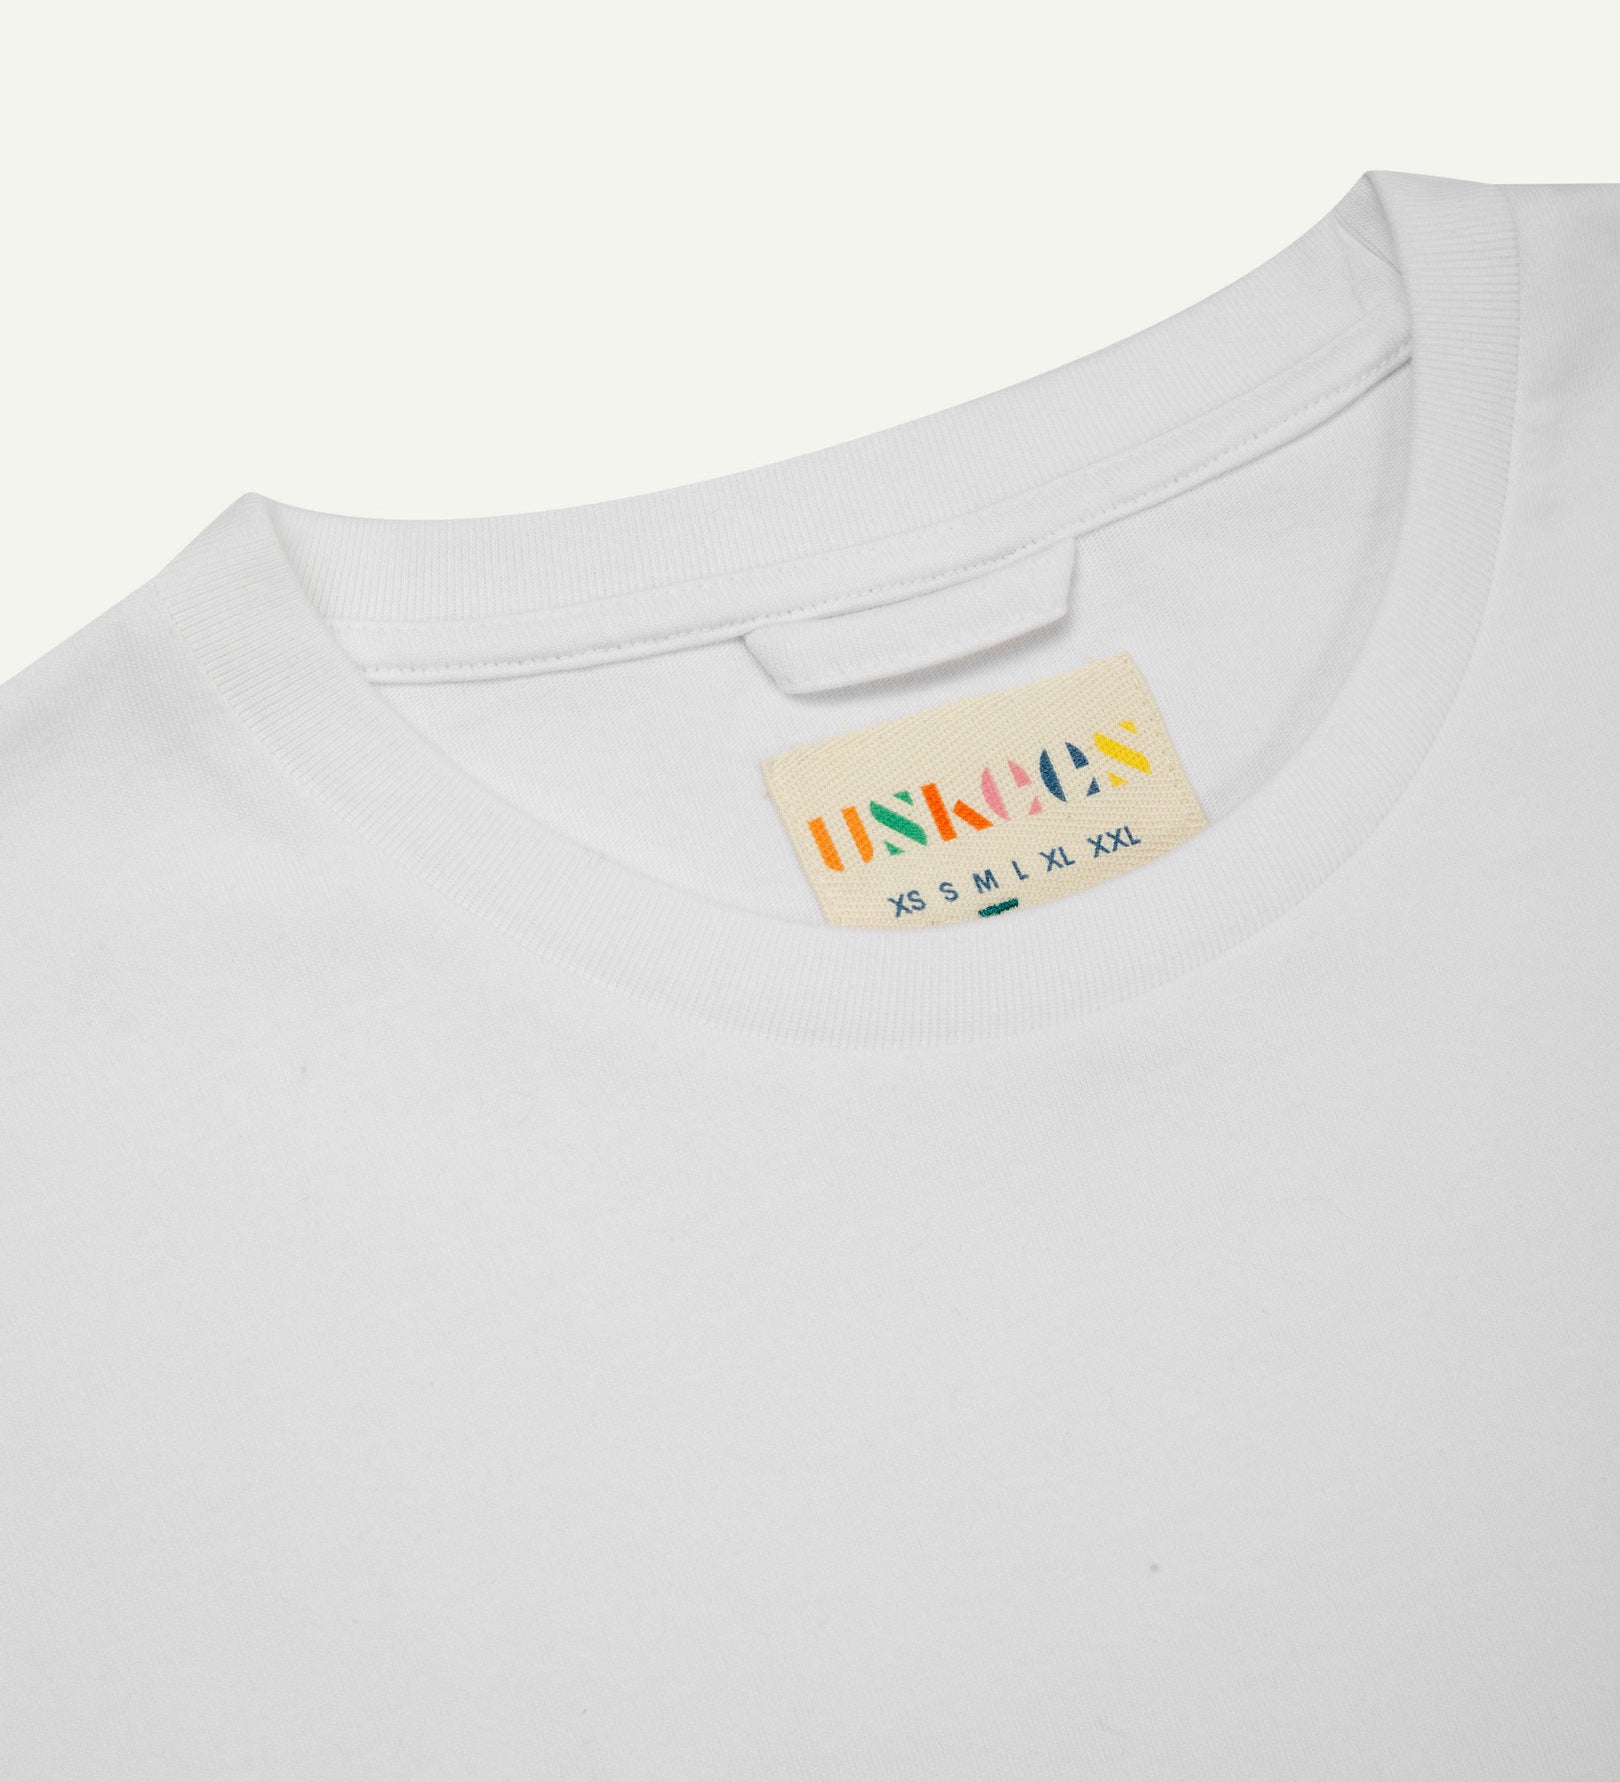 Neckline close-up of Uskees white organic cotton long-sleeved T-shirt showing hanging loop and branding label.